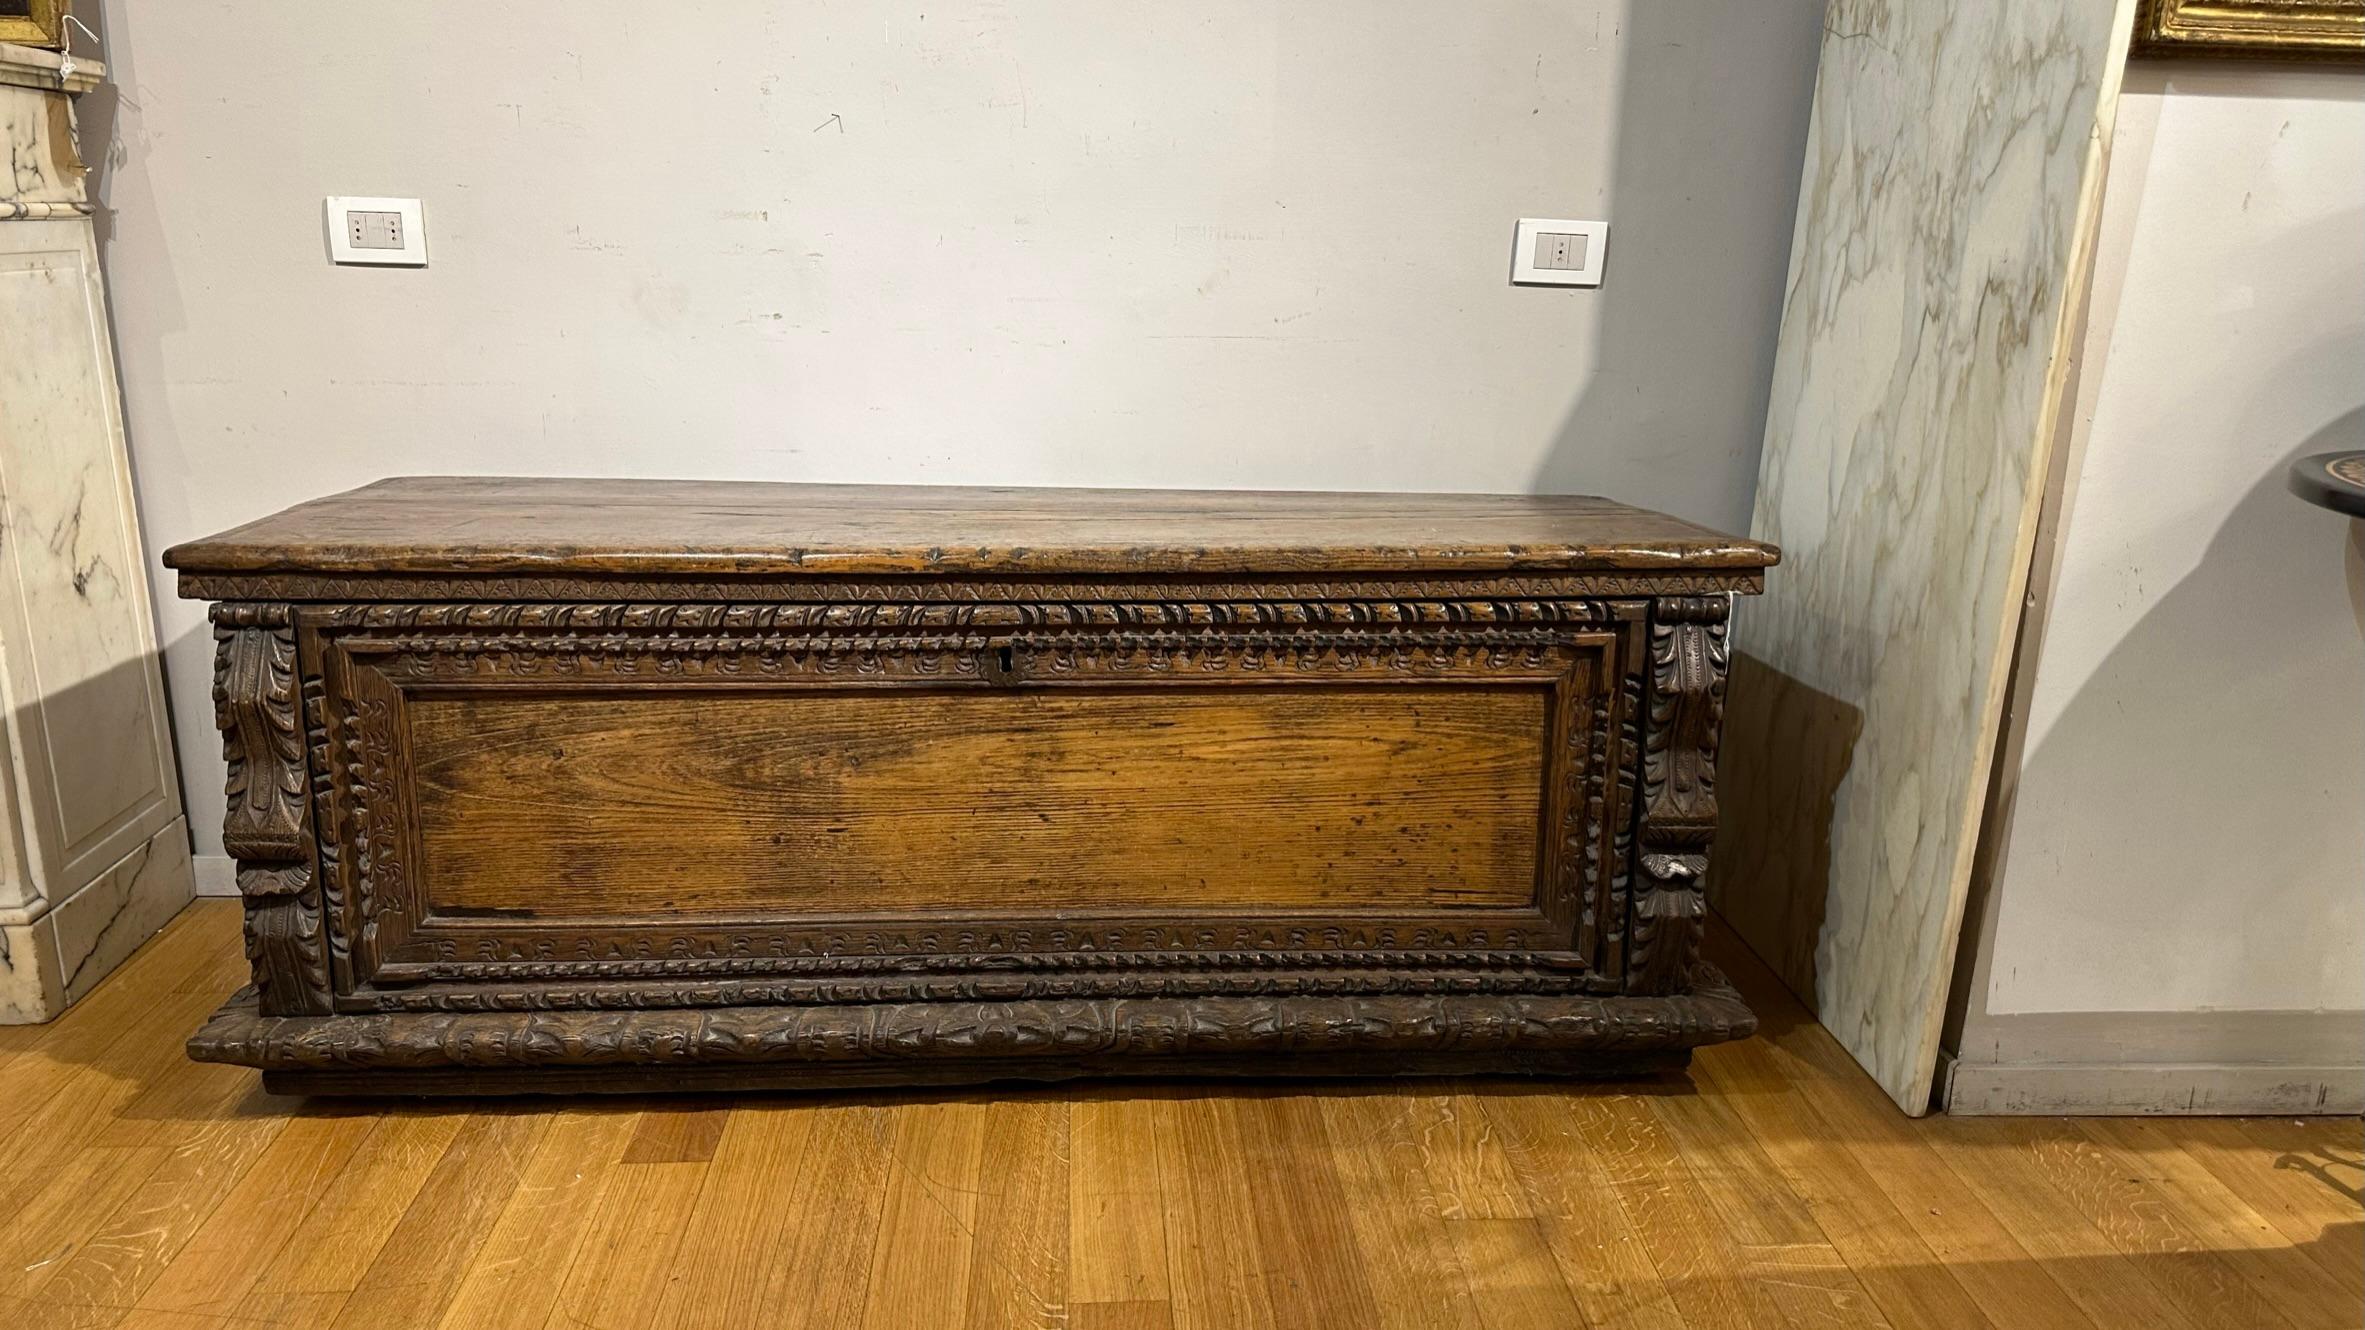 The chest in question is an elegant piece of furniture made entirely of chestnut wood. Its manufacture dates back to the Renaissance, around the second half of the 16th century, by Tuscan artisans. The chest stands out for its fine workmanship and